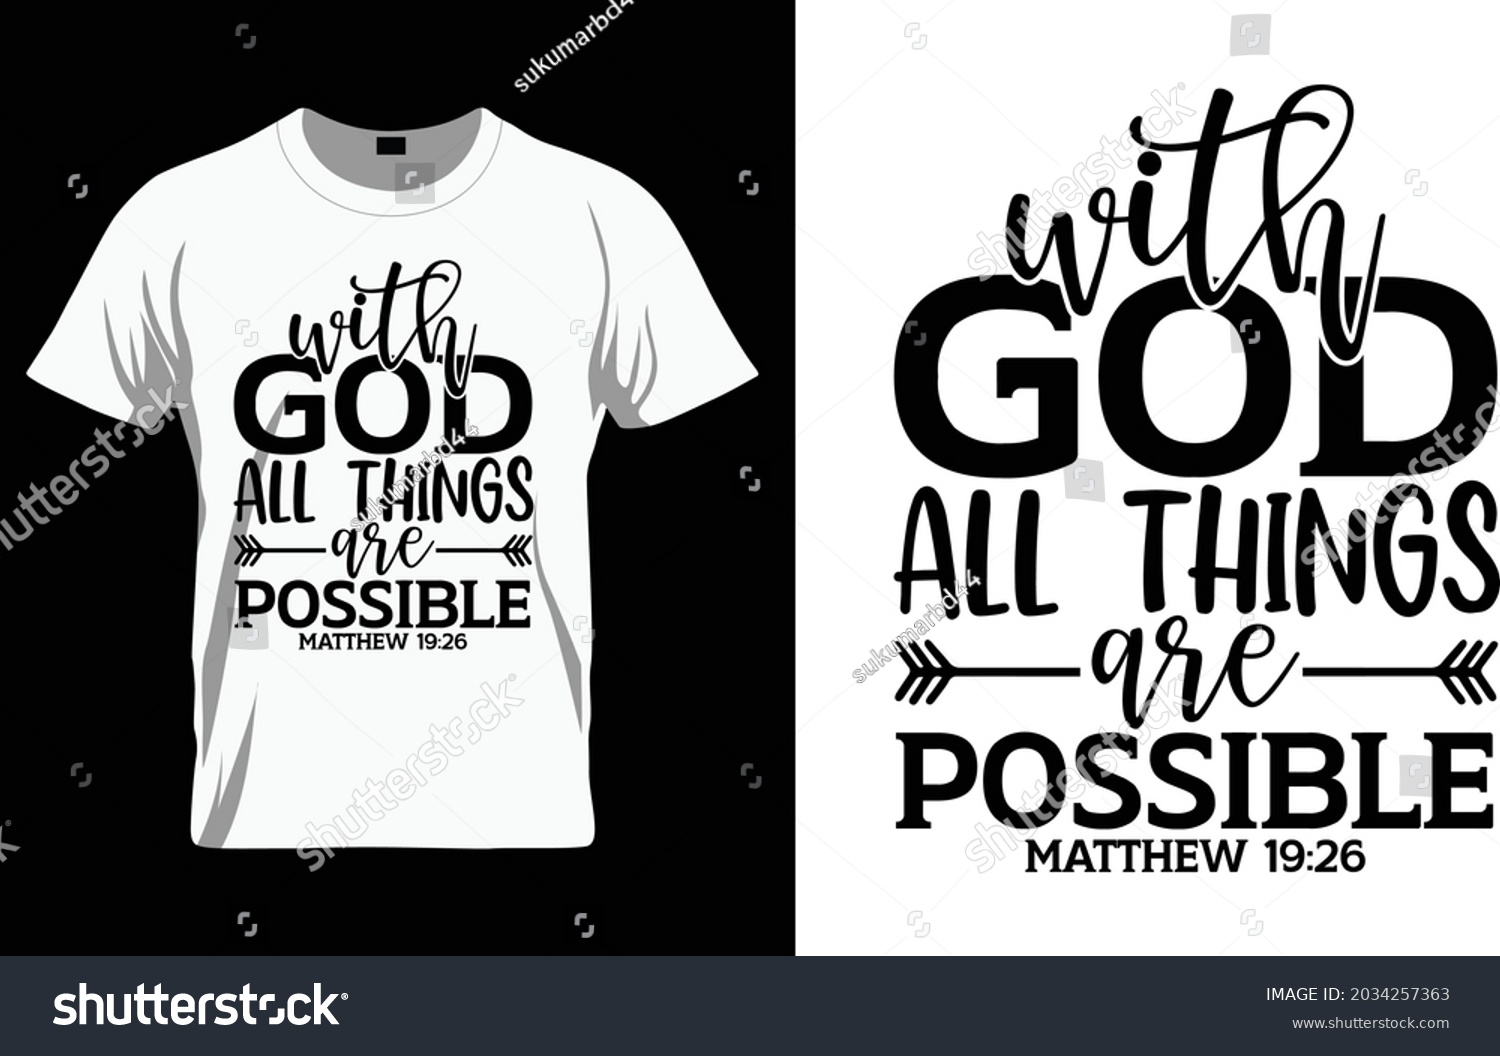 SVG of With god all things are possible matthew 19:26 - Bible Verse t shirts design, Hand drawn lettering phrase, Calligraphy t shirt design, Isolated on white background, svg Files for Cutting Cricut svg